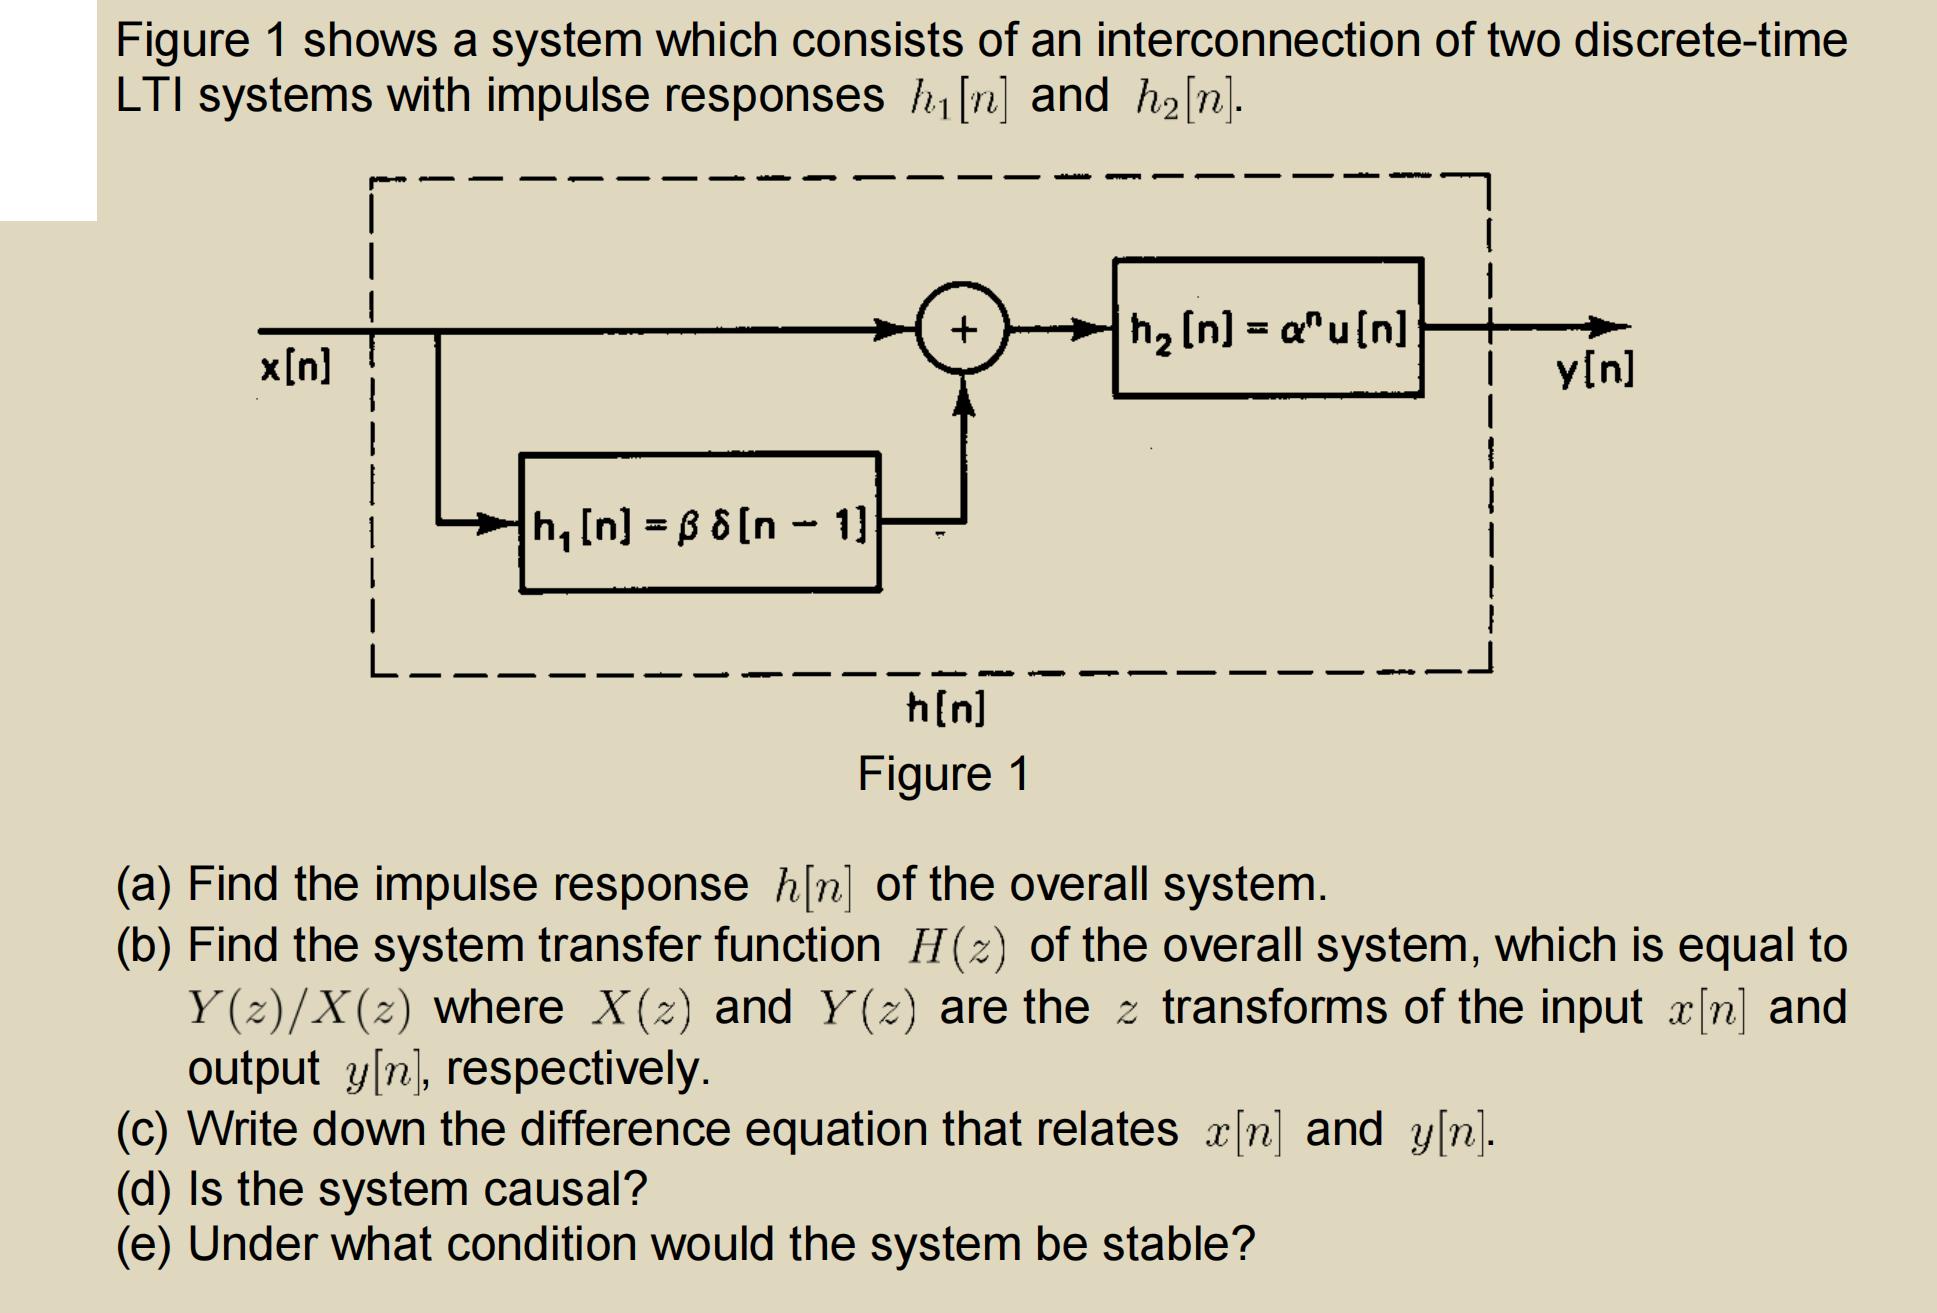 Figure 1 shows a system which consists of an interconnection of two discrete-time LTI systems with impulse